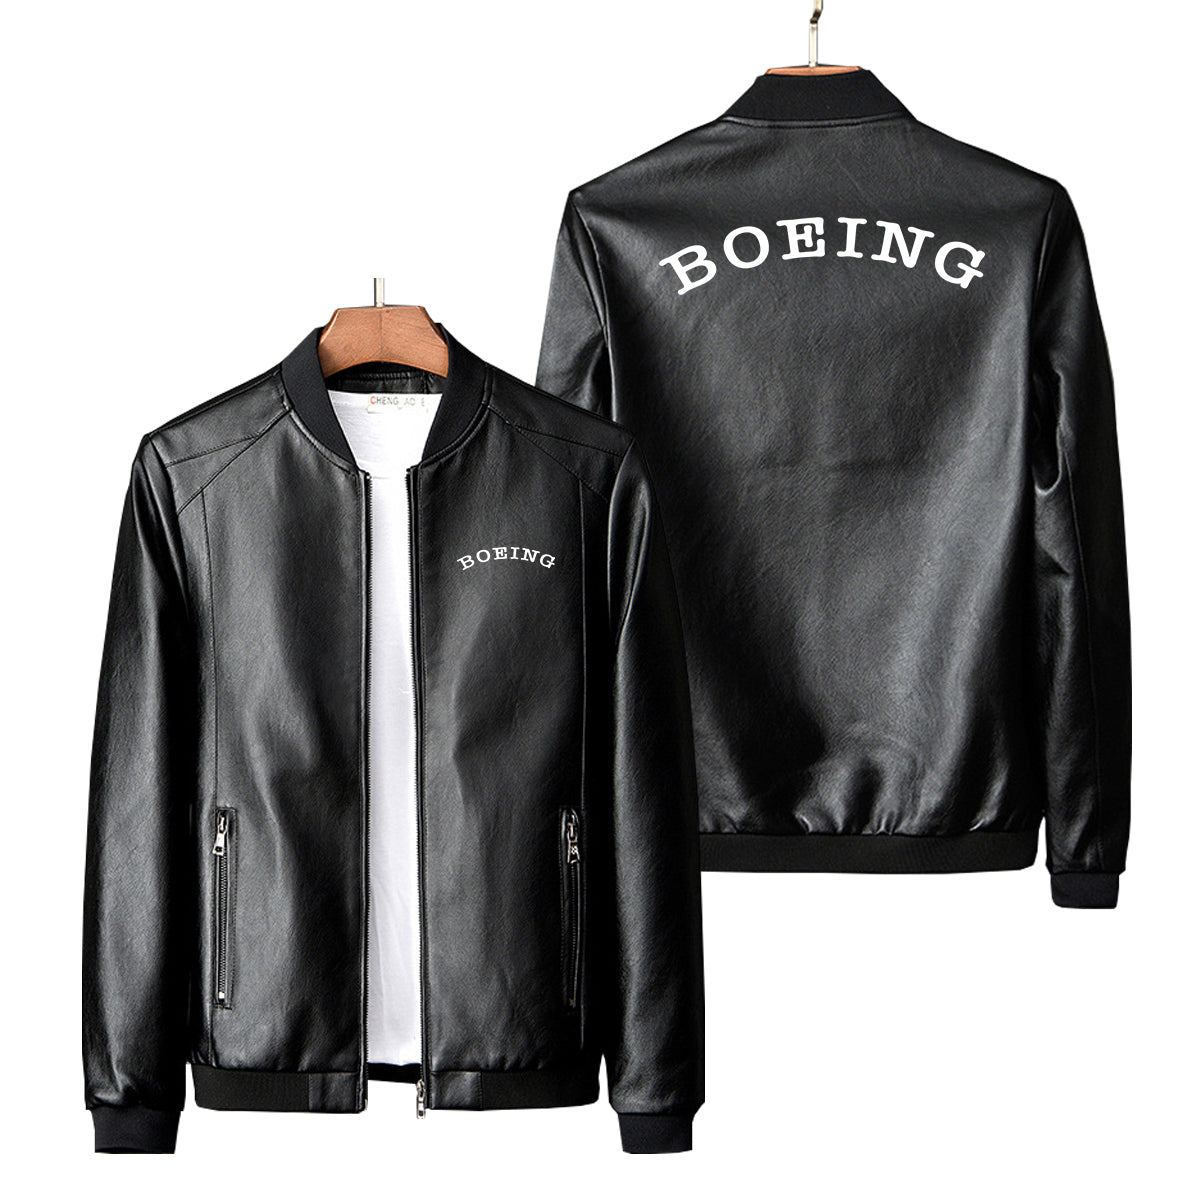 Special BOEING Text Designed PU Leather Jackets